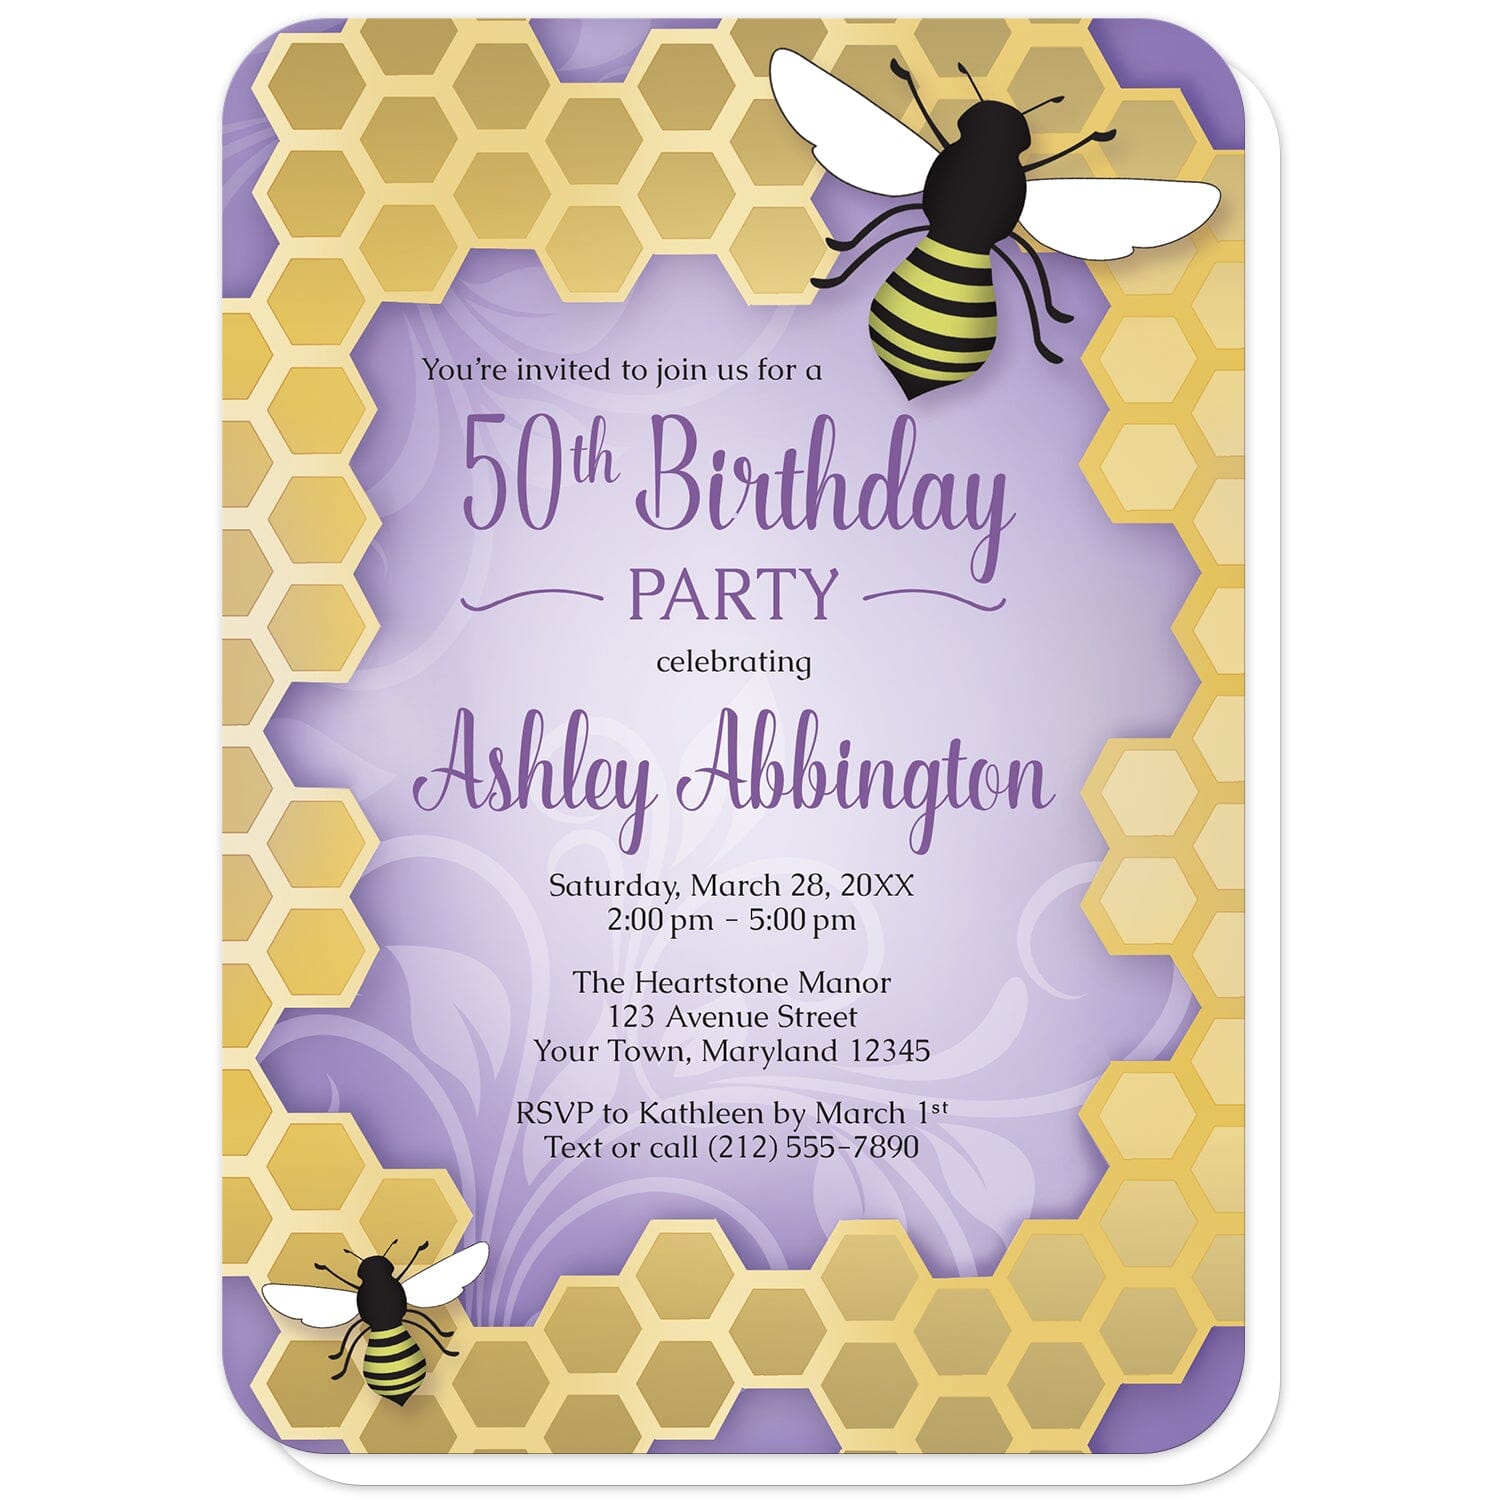 Purple Honeycomb Bee Birthday Party Invitations (with rounded corners) at Artistically Invited. Purple honeycomb bee birthday party invitations with an illustration of two bees on a golden yellow honeycomb frame design around the invitation over a purple flourish background color. Your personalized birthday party details are custom printed in black and purple in the middle over the purple background design.